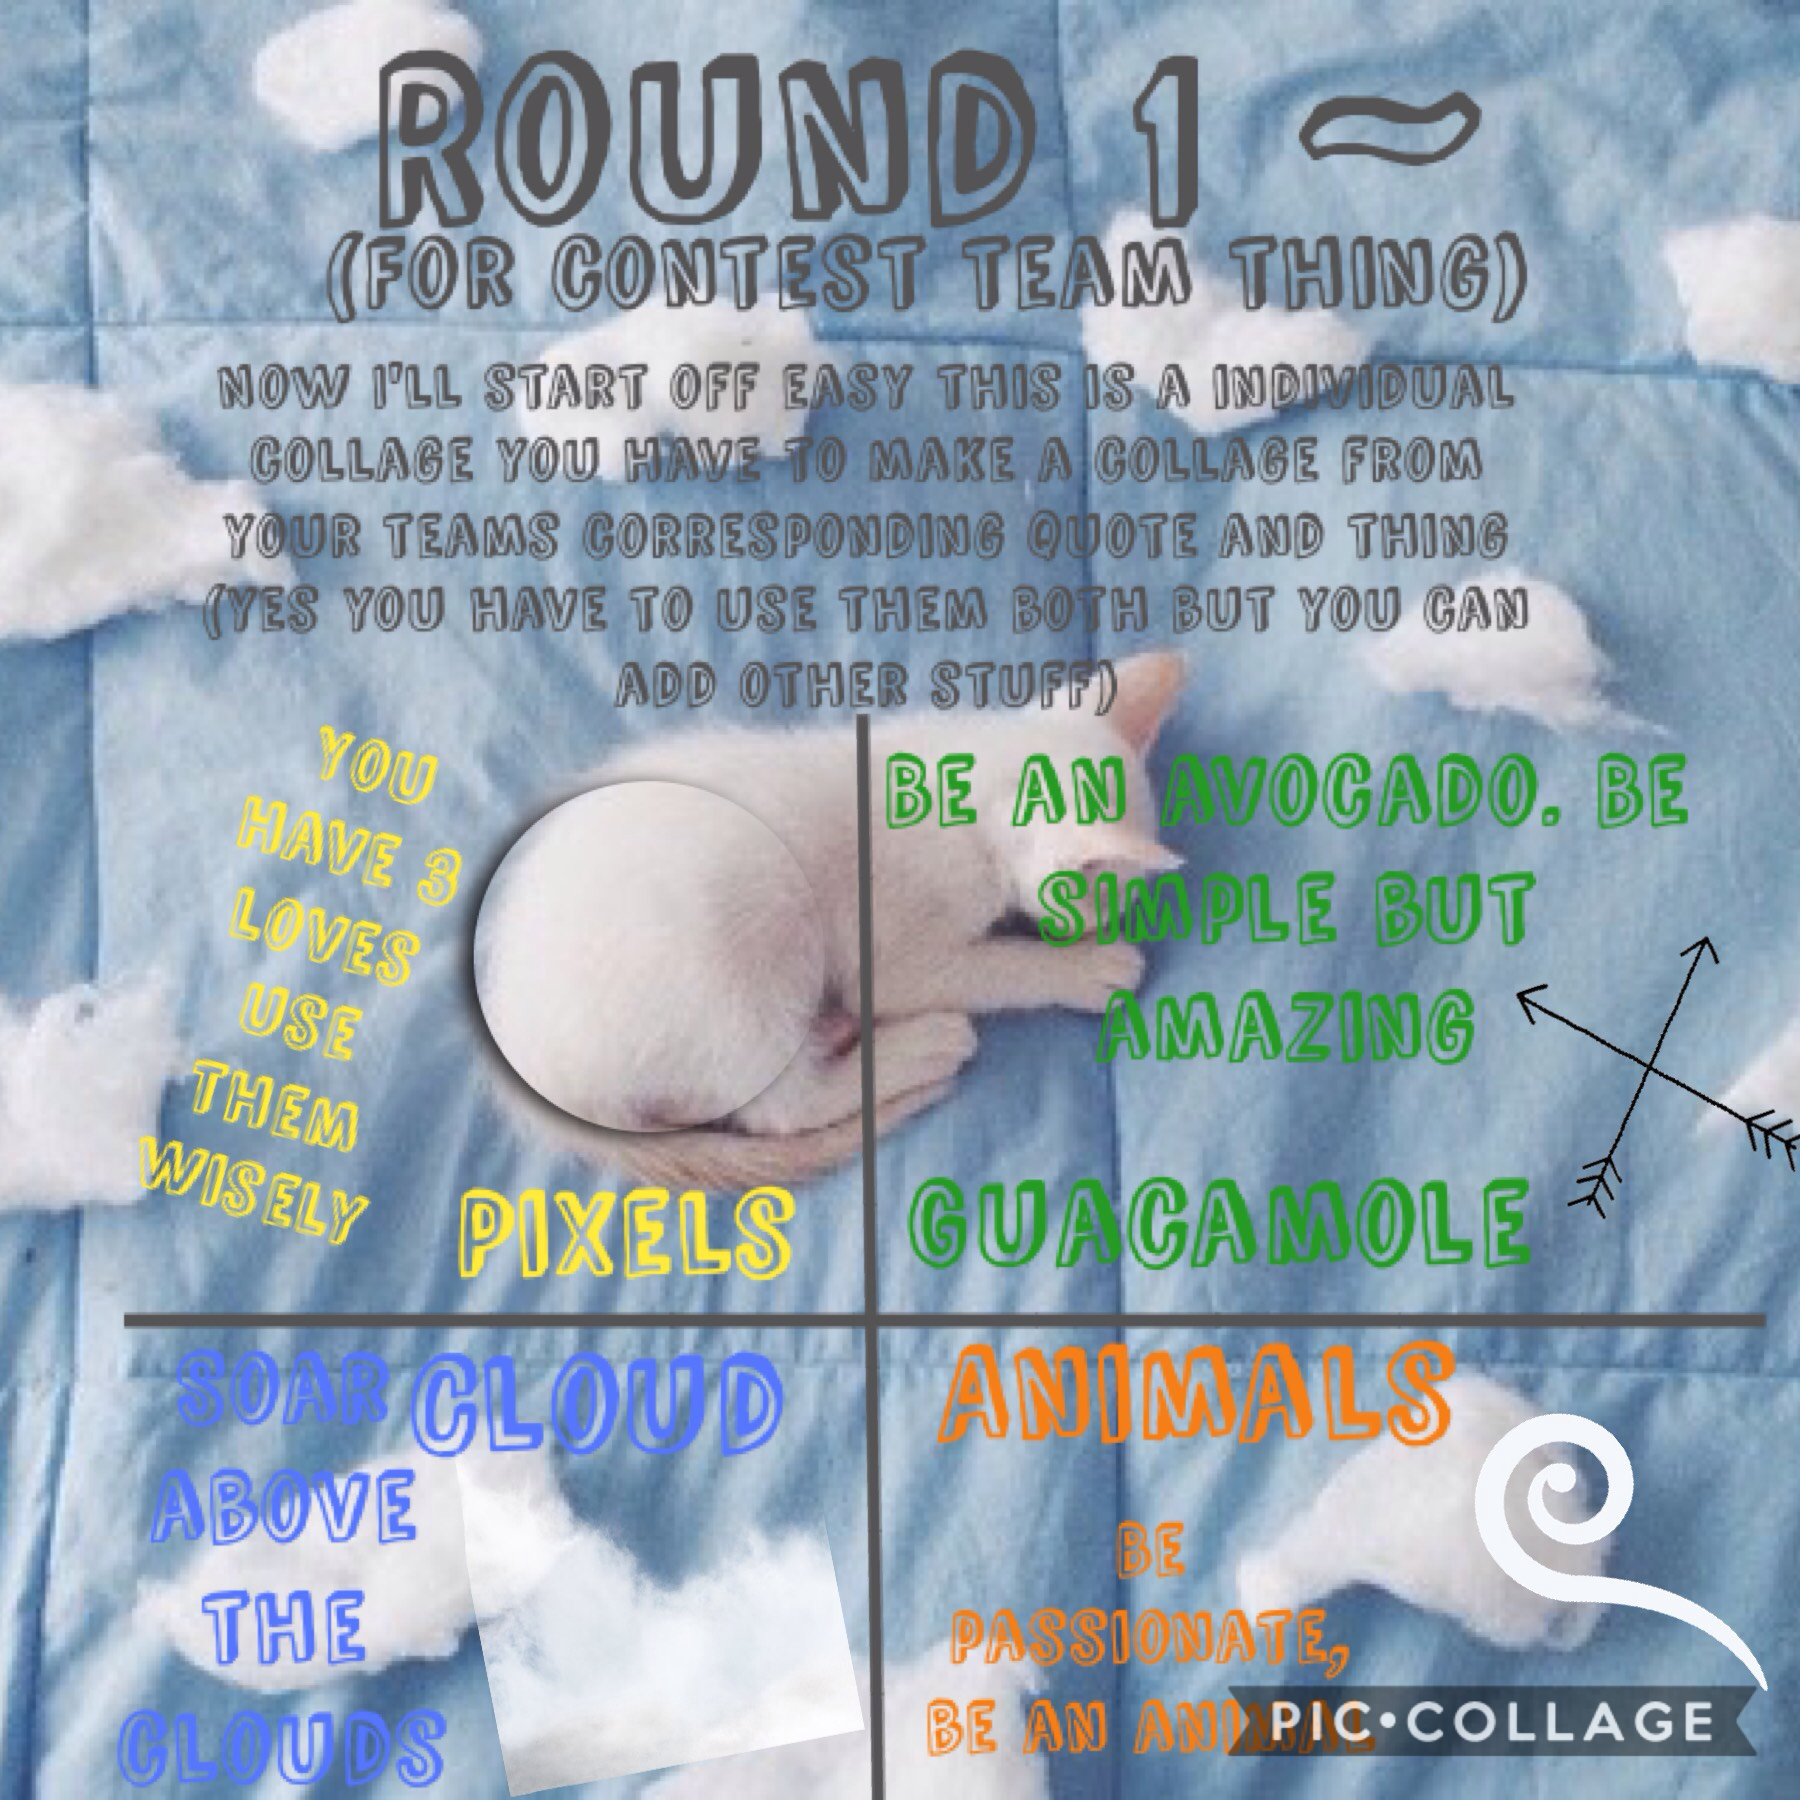 Round 1 ends on the 25th (aka Christmas) of December ~ Tik_Tok_Time